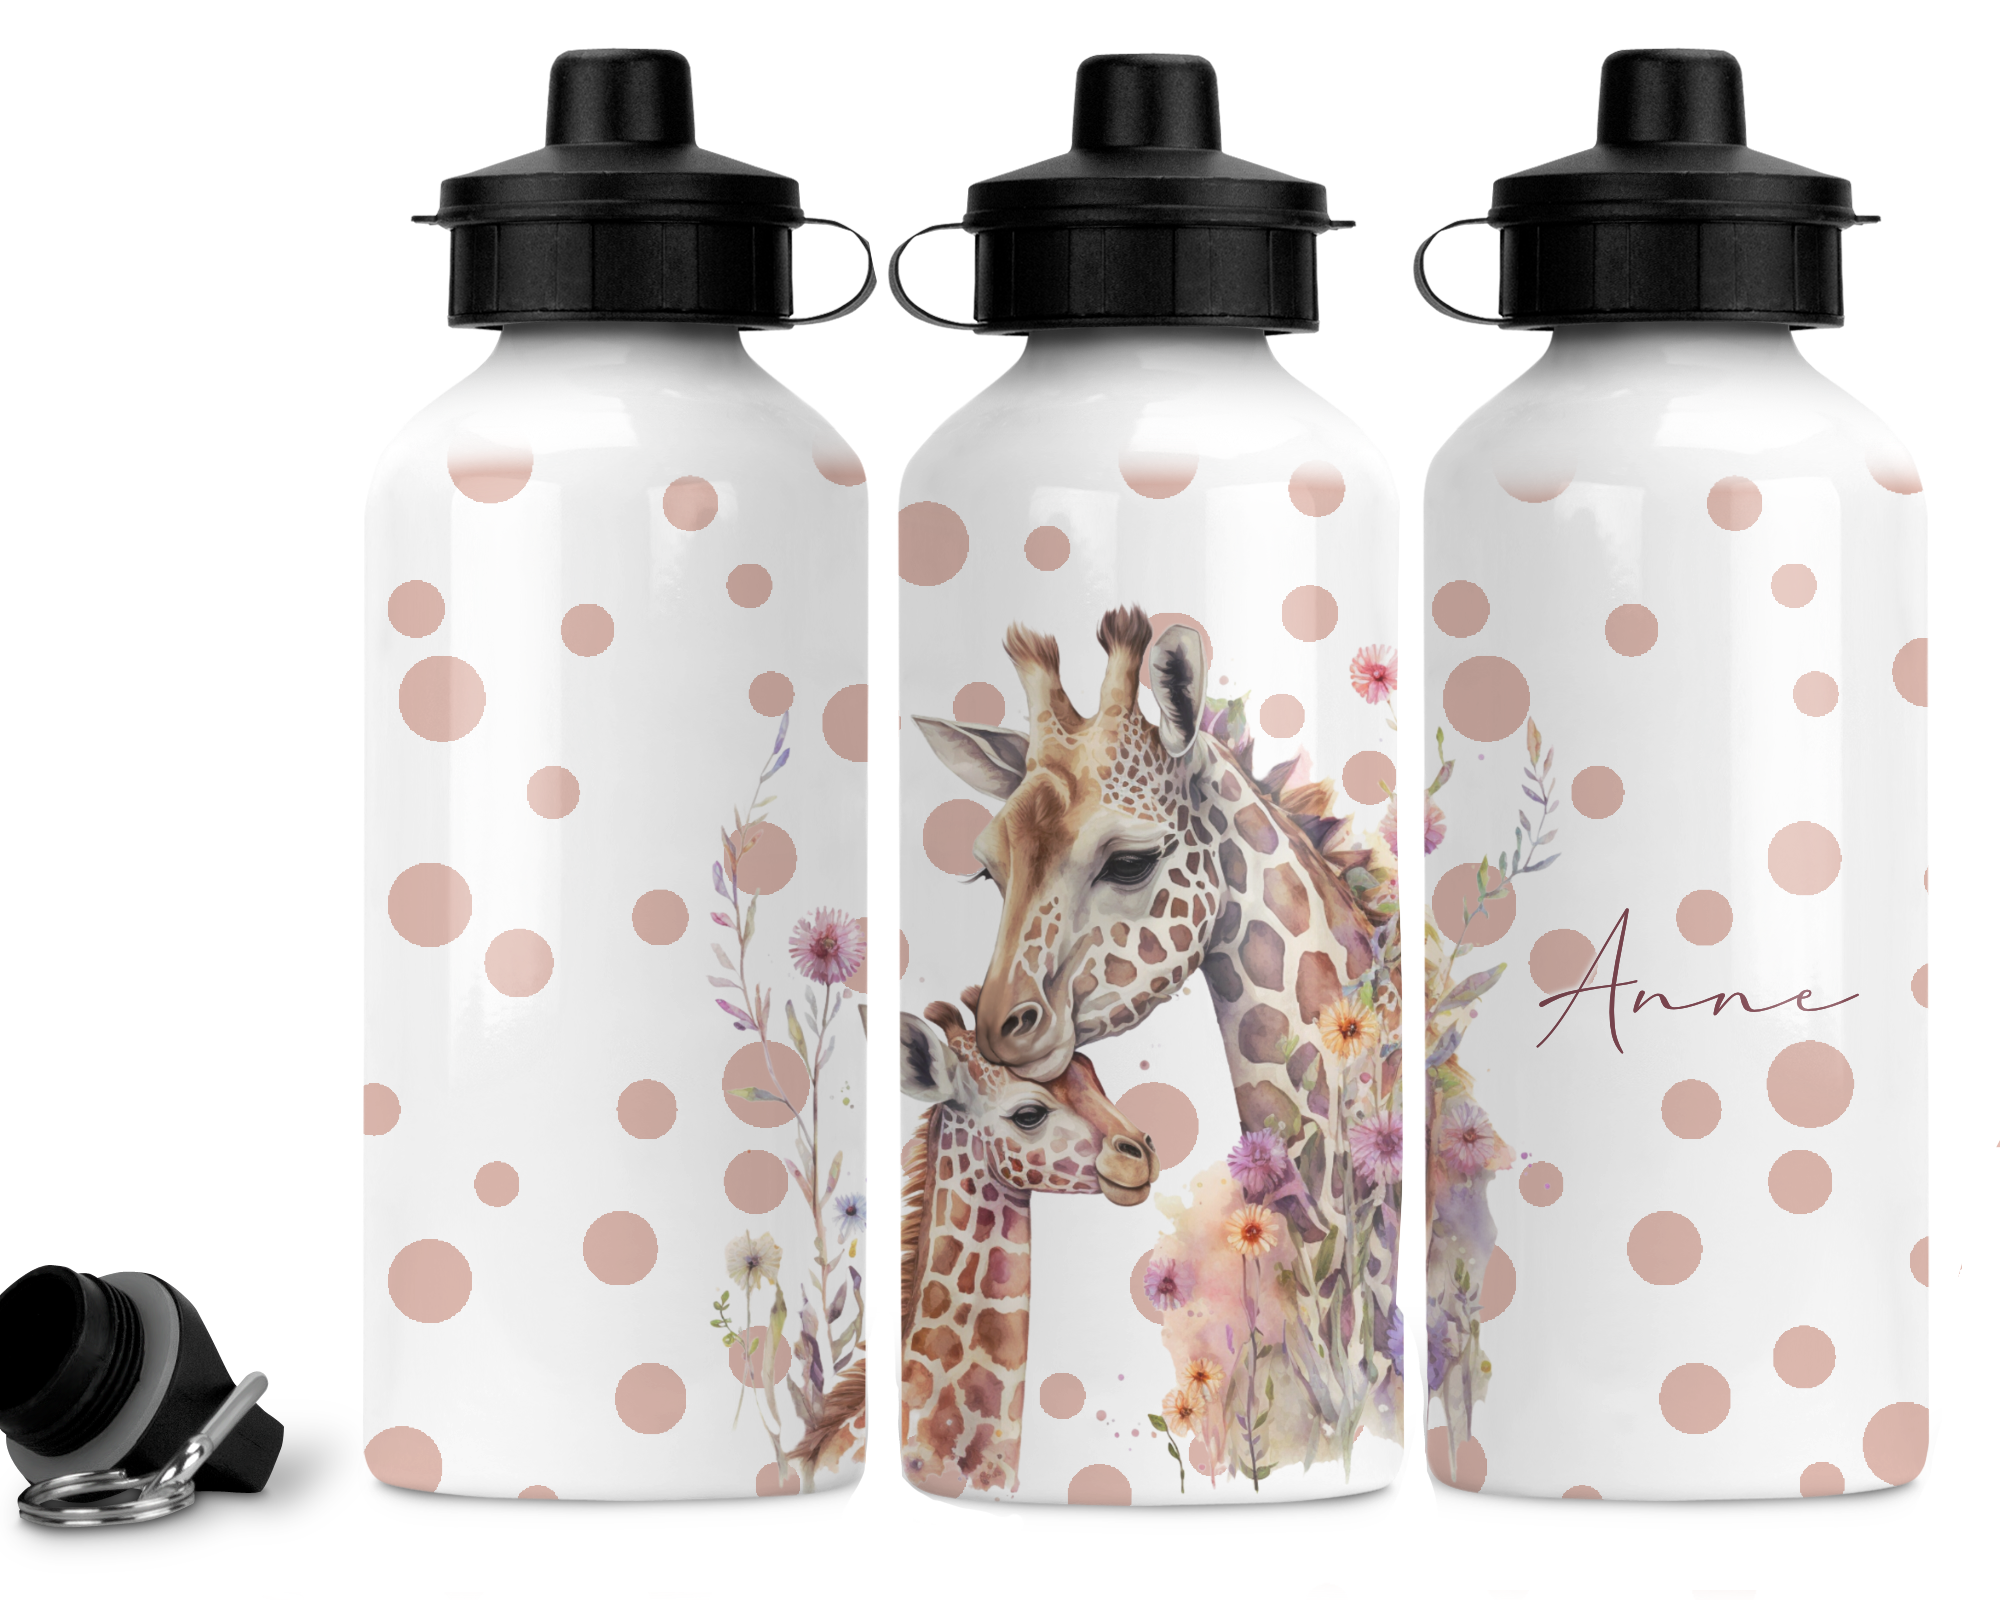 Add your own photos | personalised Photos | Unique Gifts | Giraffe Water Bottle